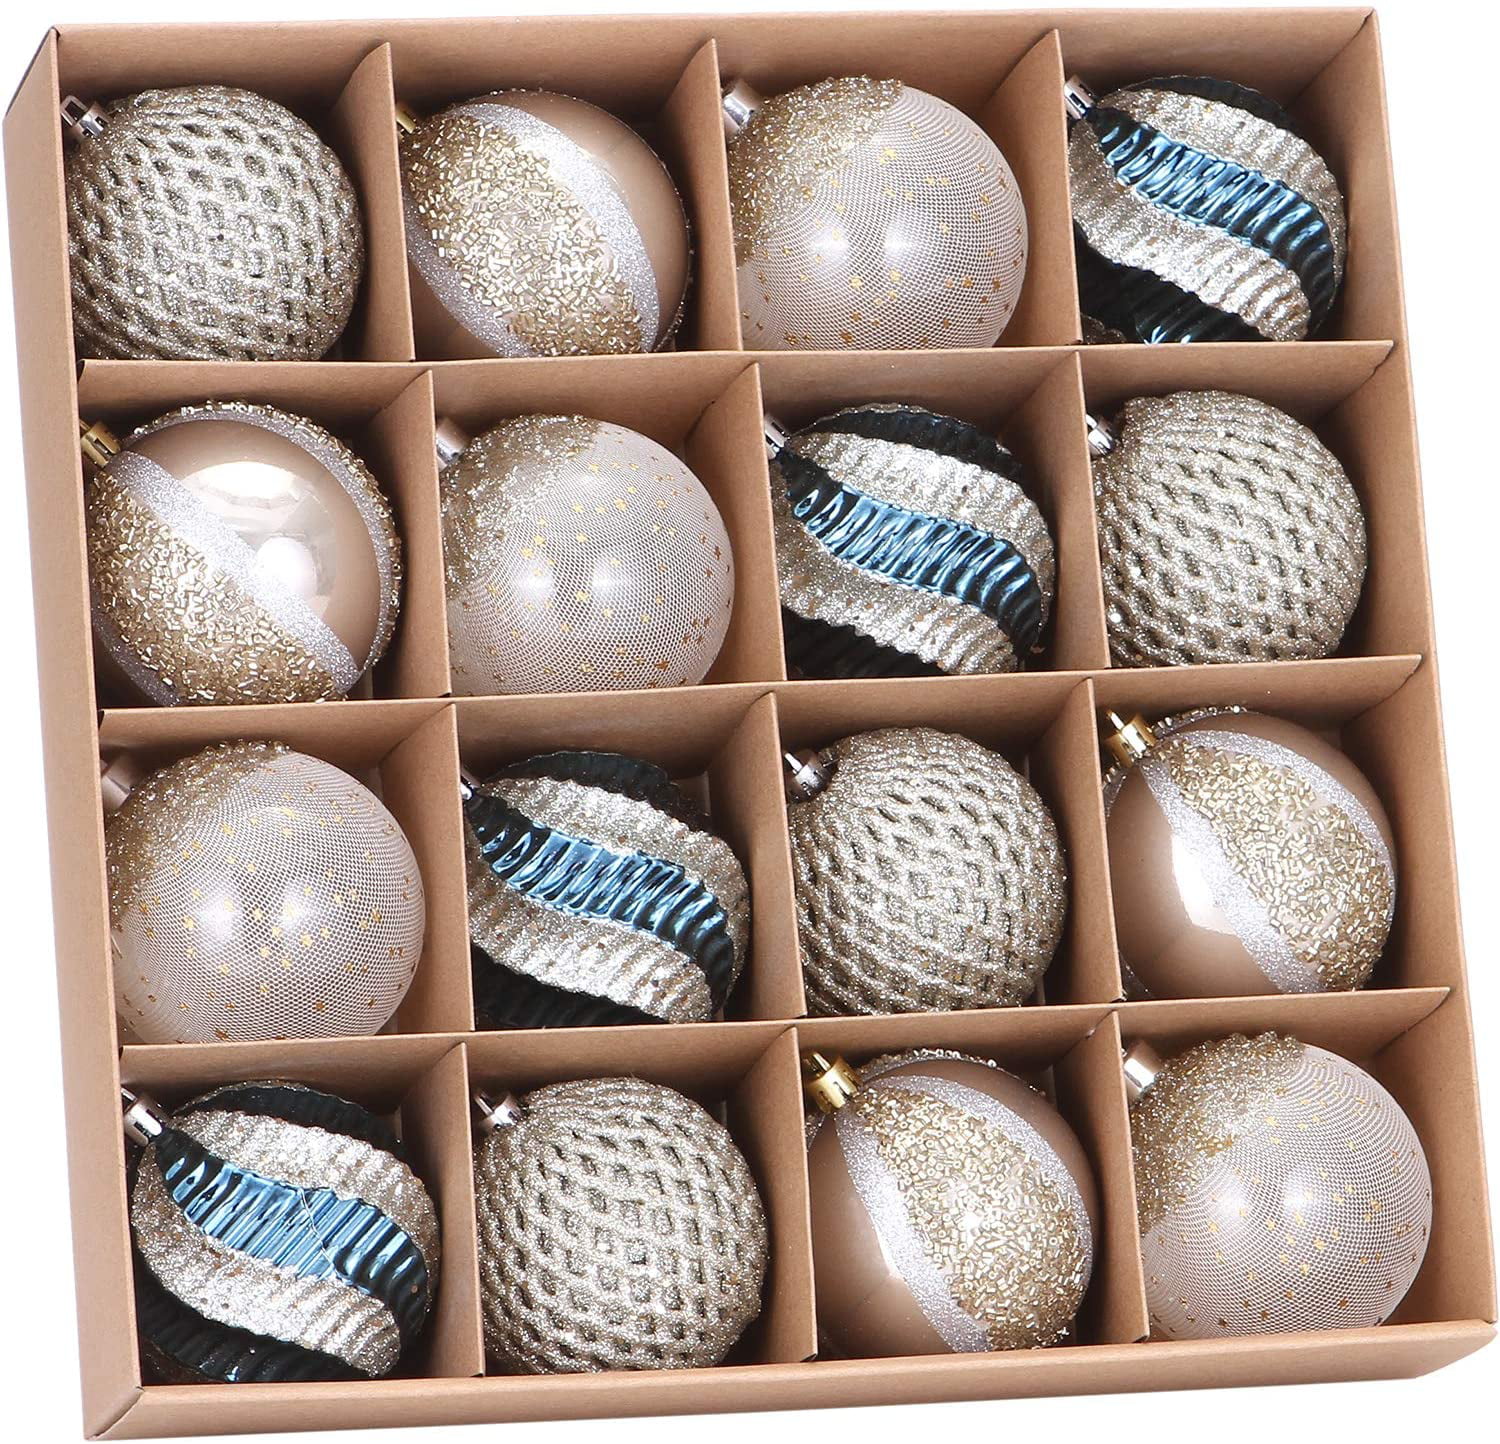 Stone Blue & Silver Grey Sea Team 80mm/3.15 Delicate Contrast Color Theme Painting & Glittering Christmas Tree Pendants Decorative Hanging Christmas Baubles Balls Ornaments Set 16 Pieces